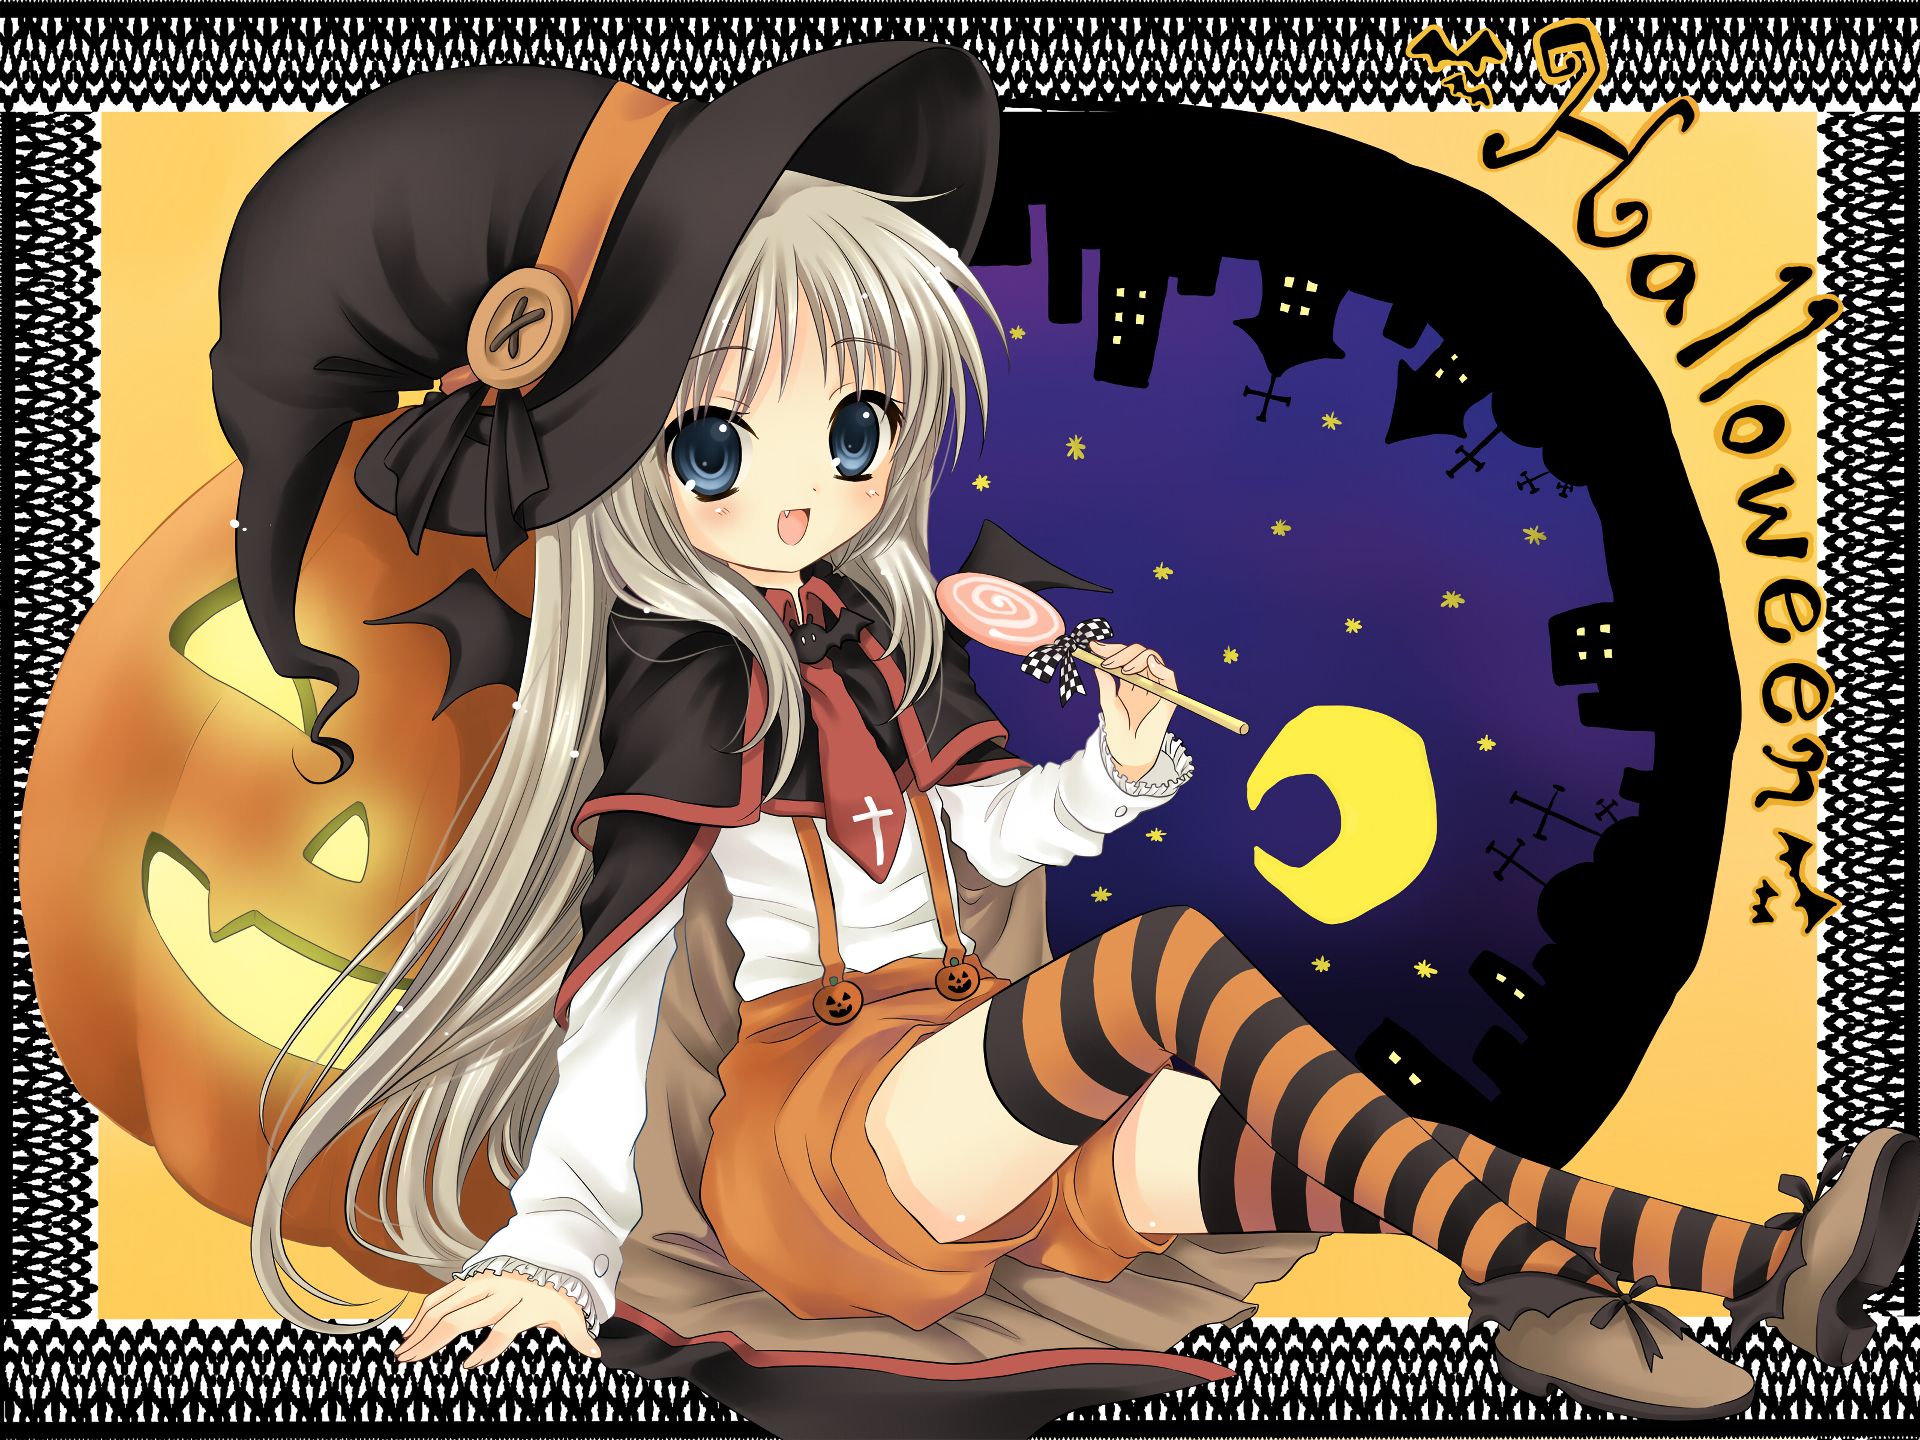 Cute Anime Witch Of Halloween Night 4K wallpaper download